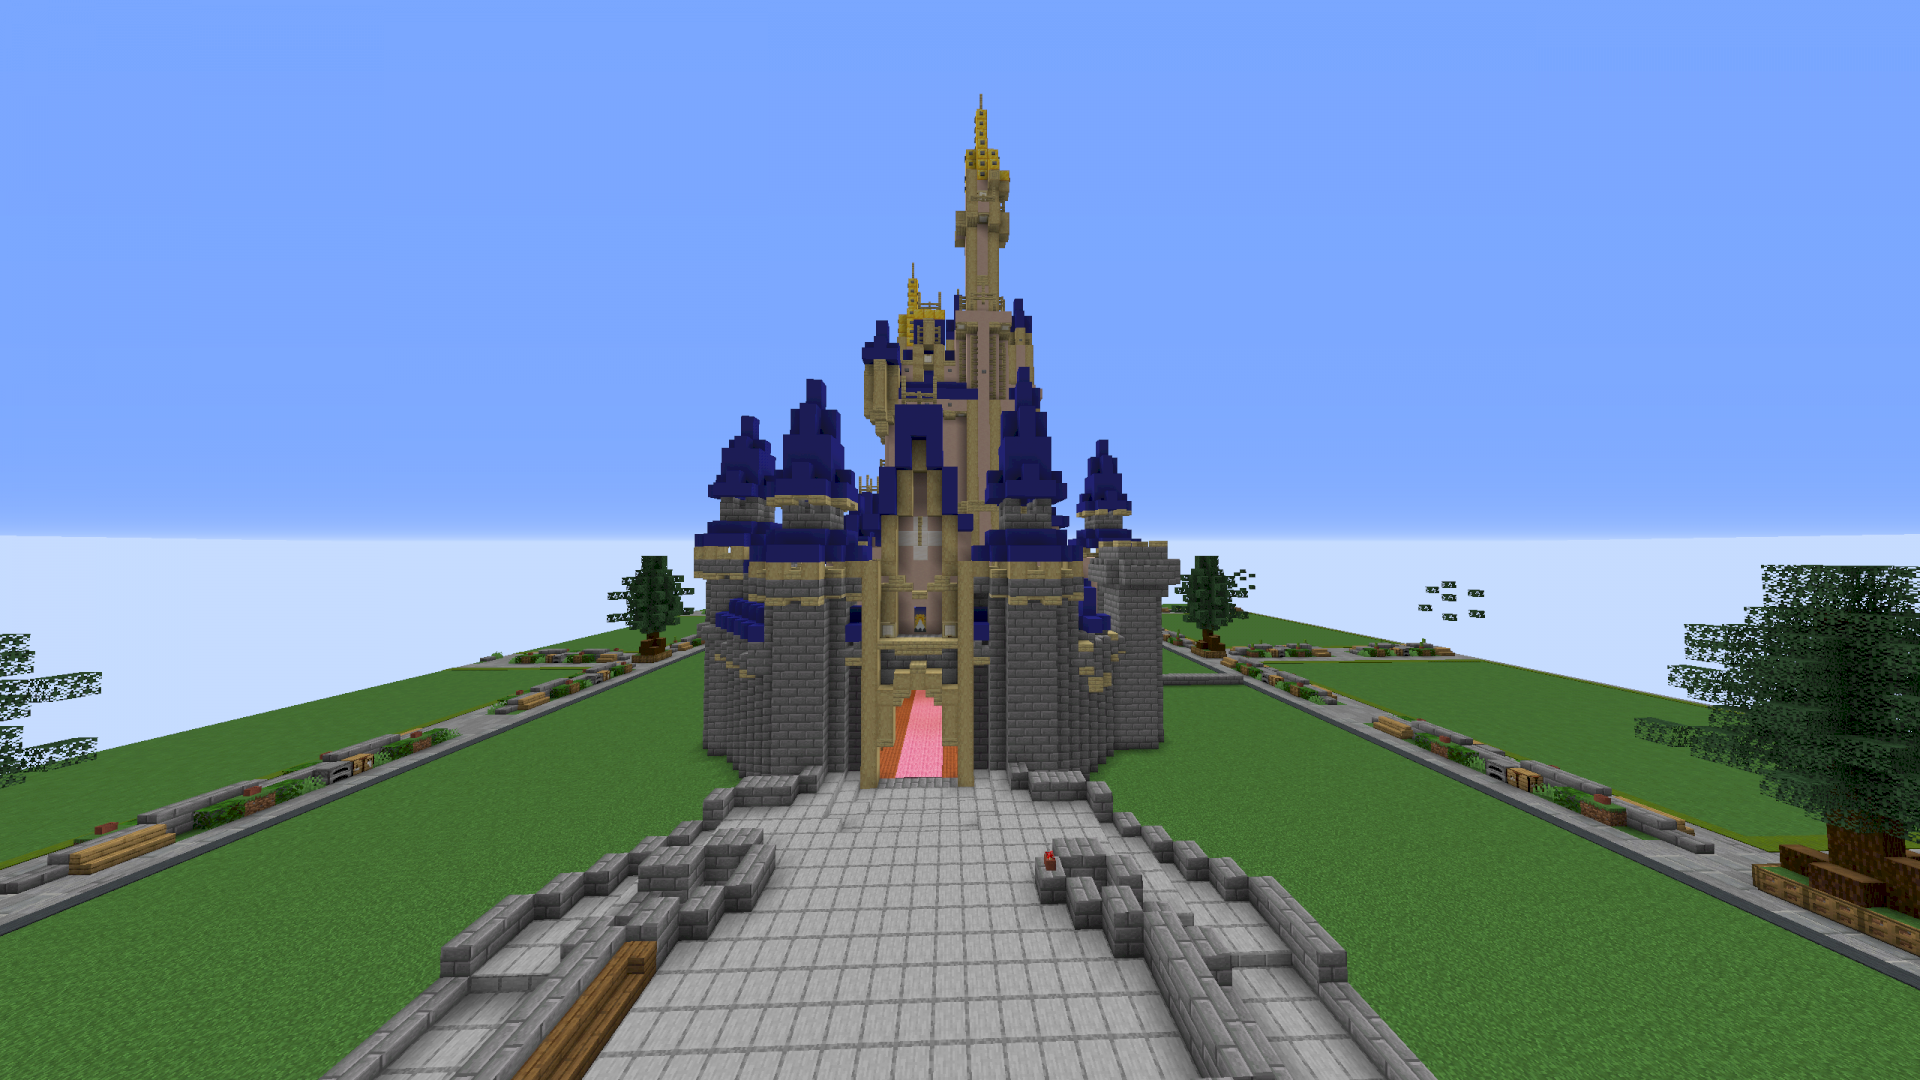 What can the Disney castle do